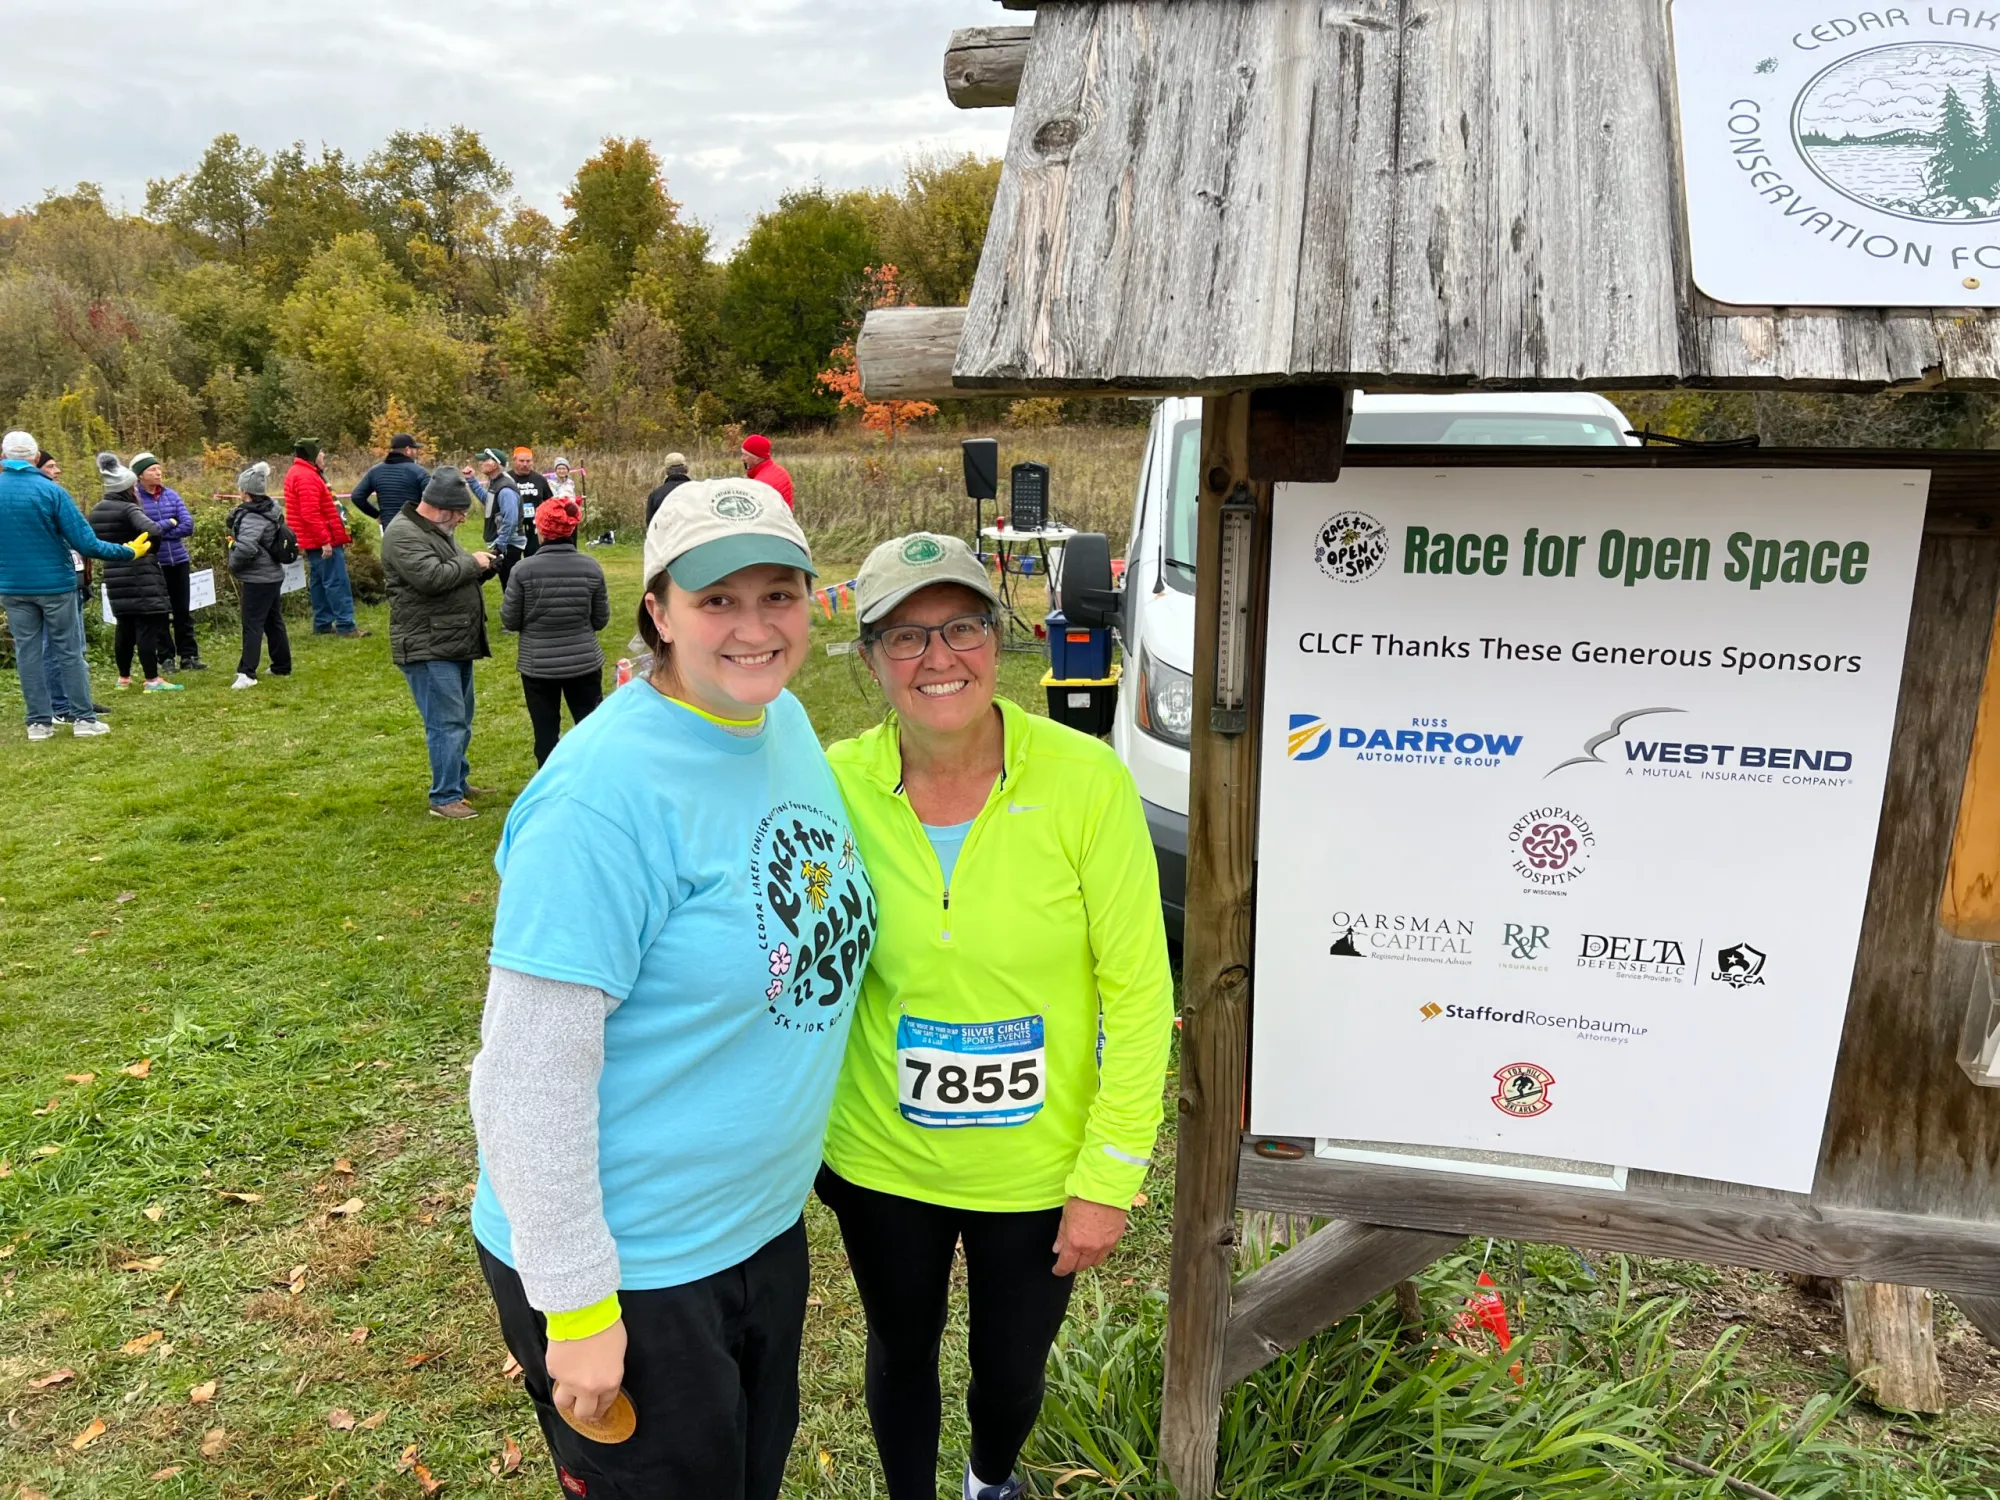 Two women in running gear standing in front of a sign that says "Race for Open Space" and a small crowd in the background.